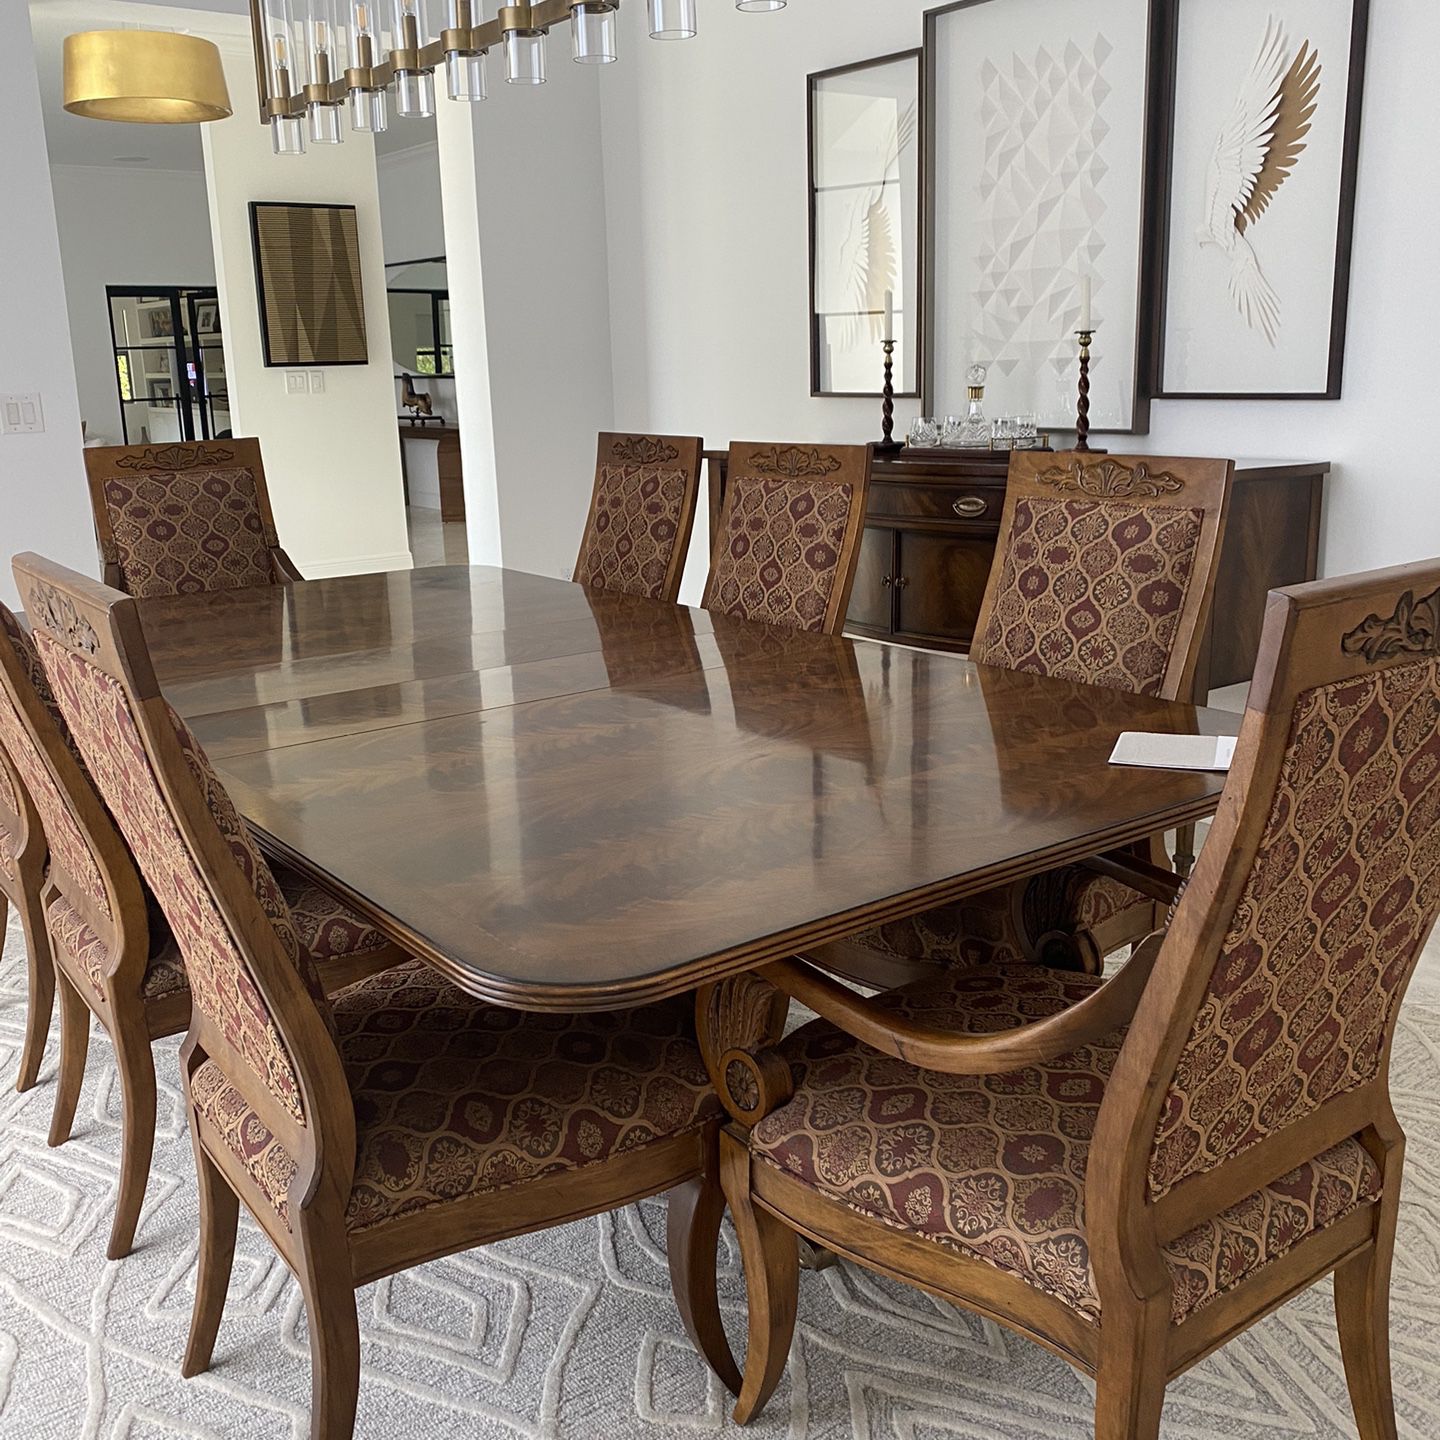 Eight Century furniture dining chairs